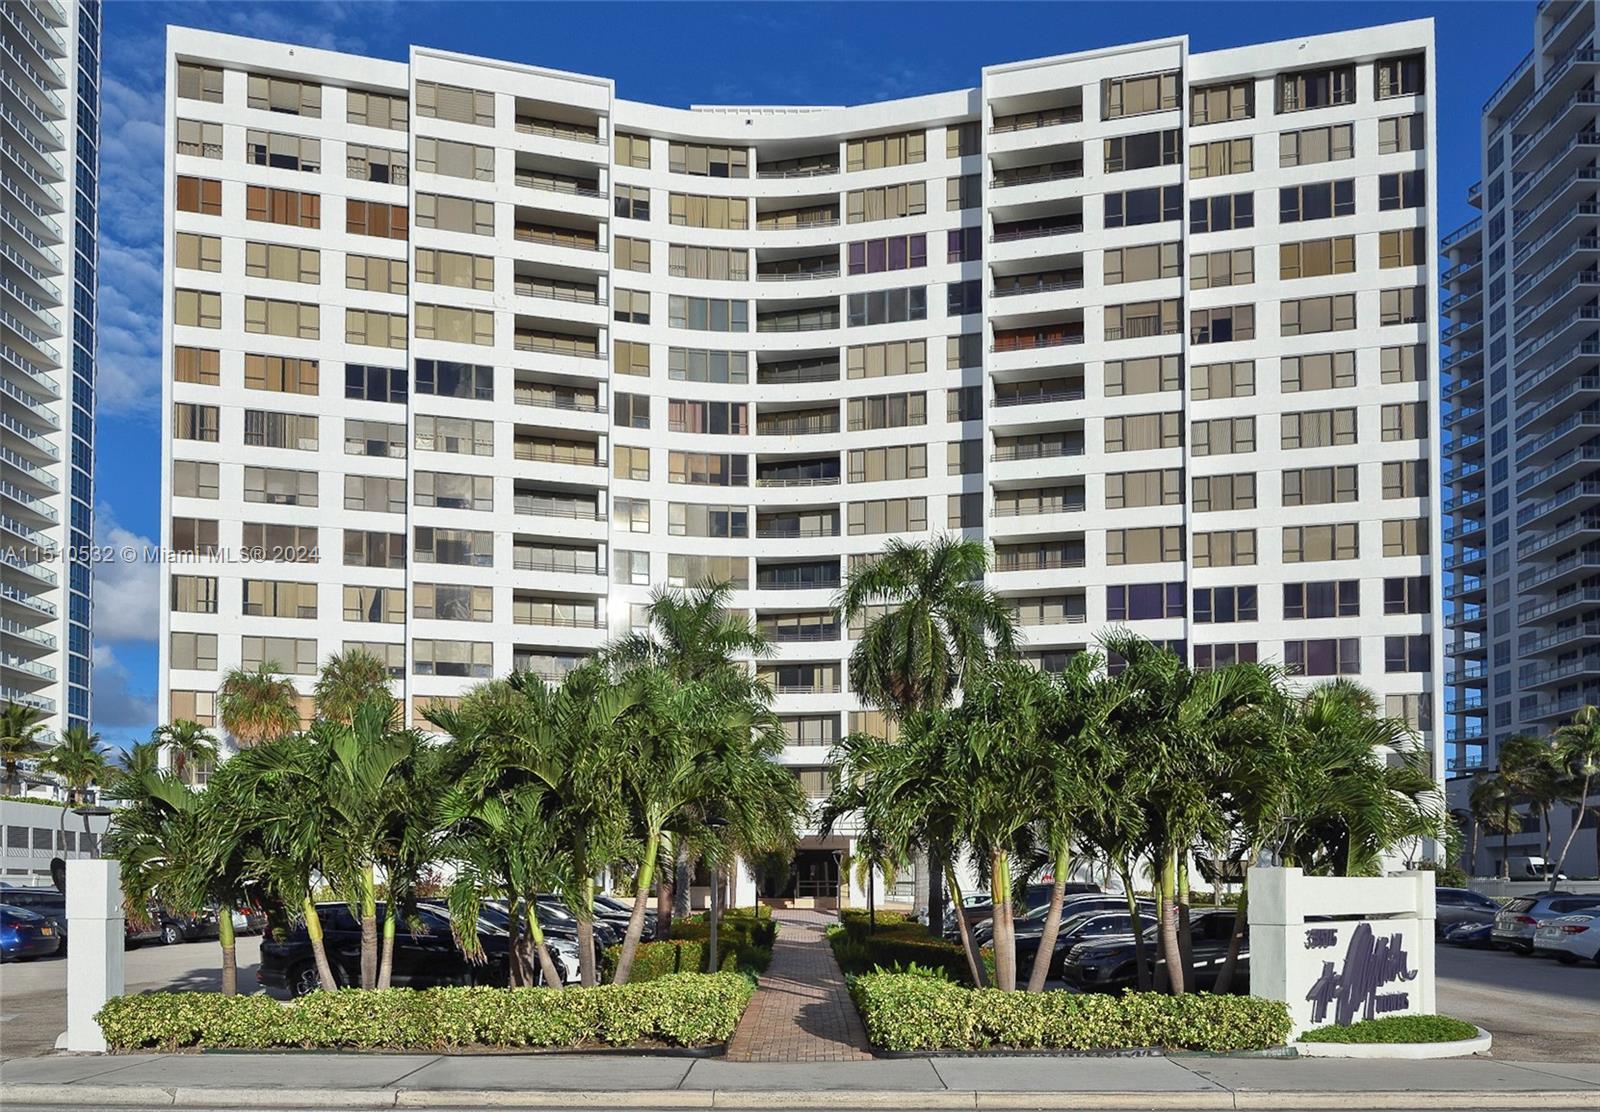 Photo of 3505 S Ocean Dr #910 in Hollywood, FL